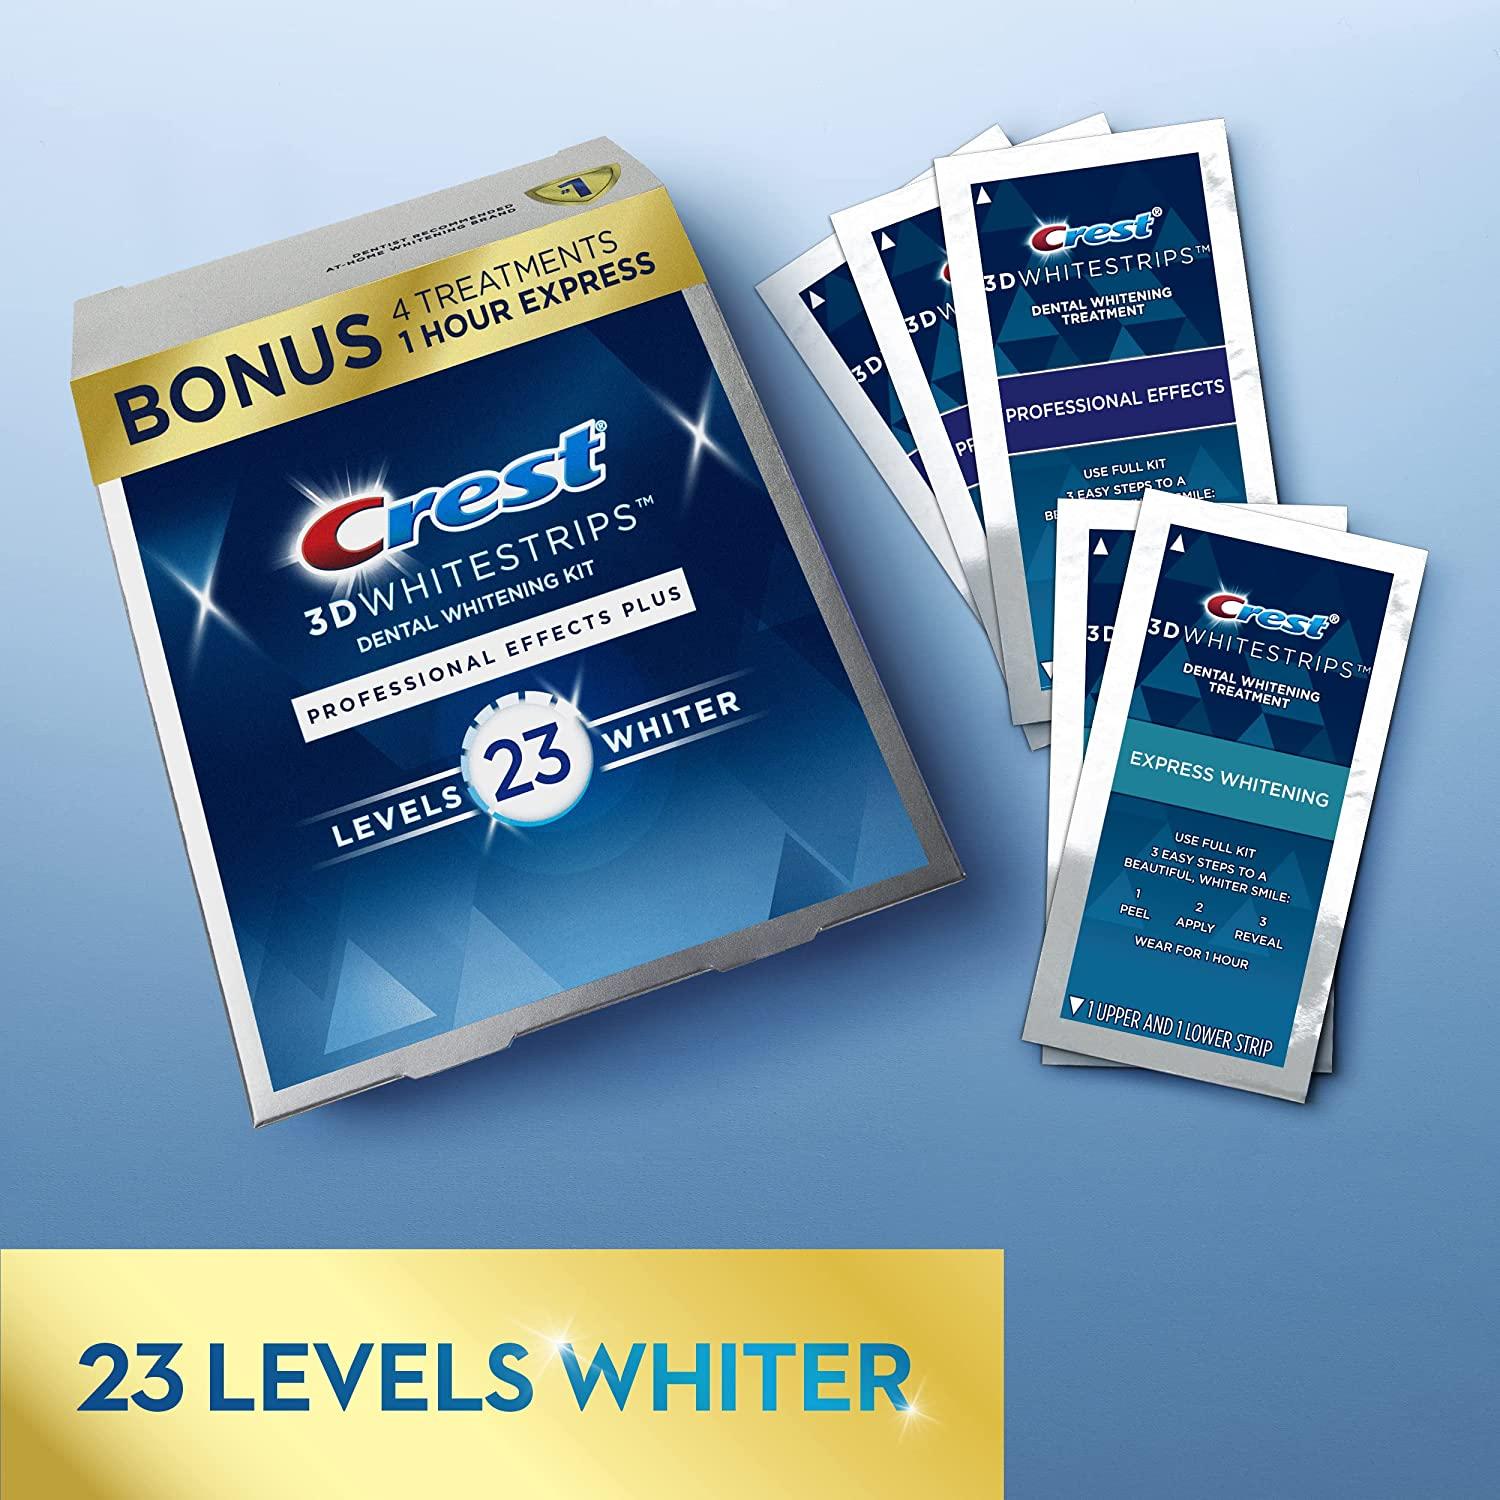 CREST 3D WHITE - WHITESTRIPS PROFESSIONAL EFFECTS 20 Whitening